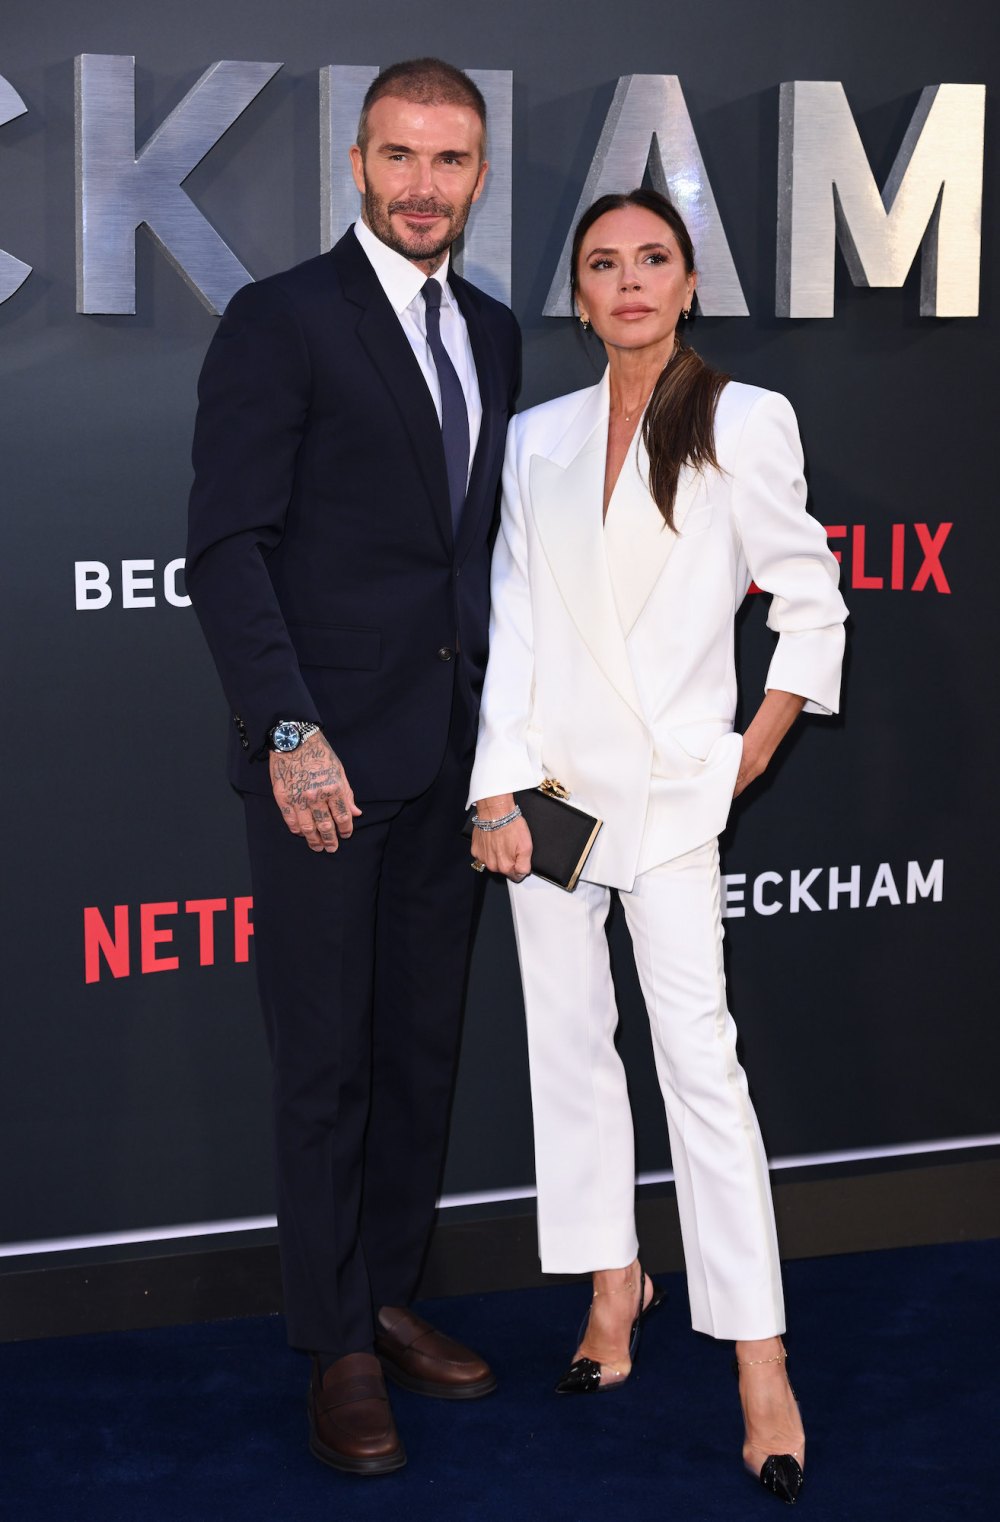 Victoria Beckham Says She Was Pissed When Husband David Almost Missed Son’s Birth Because He Was at Photoshoot with JLo